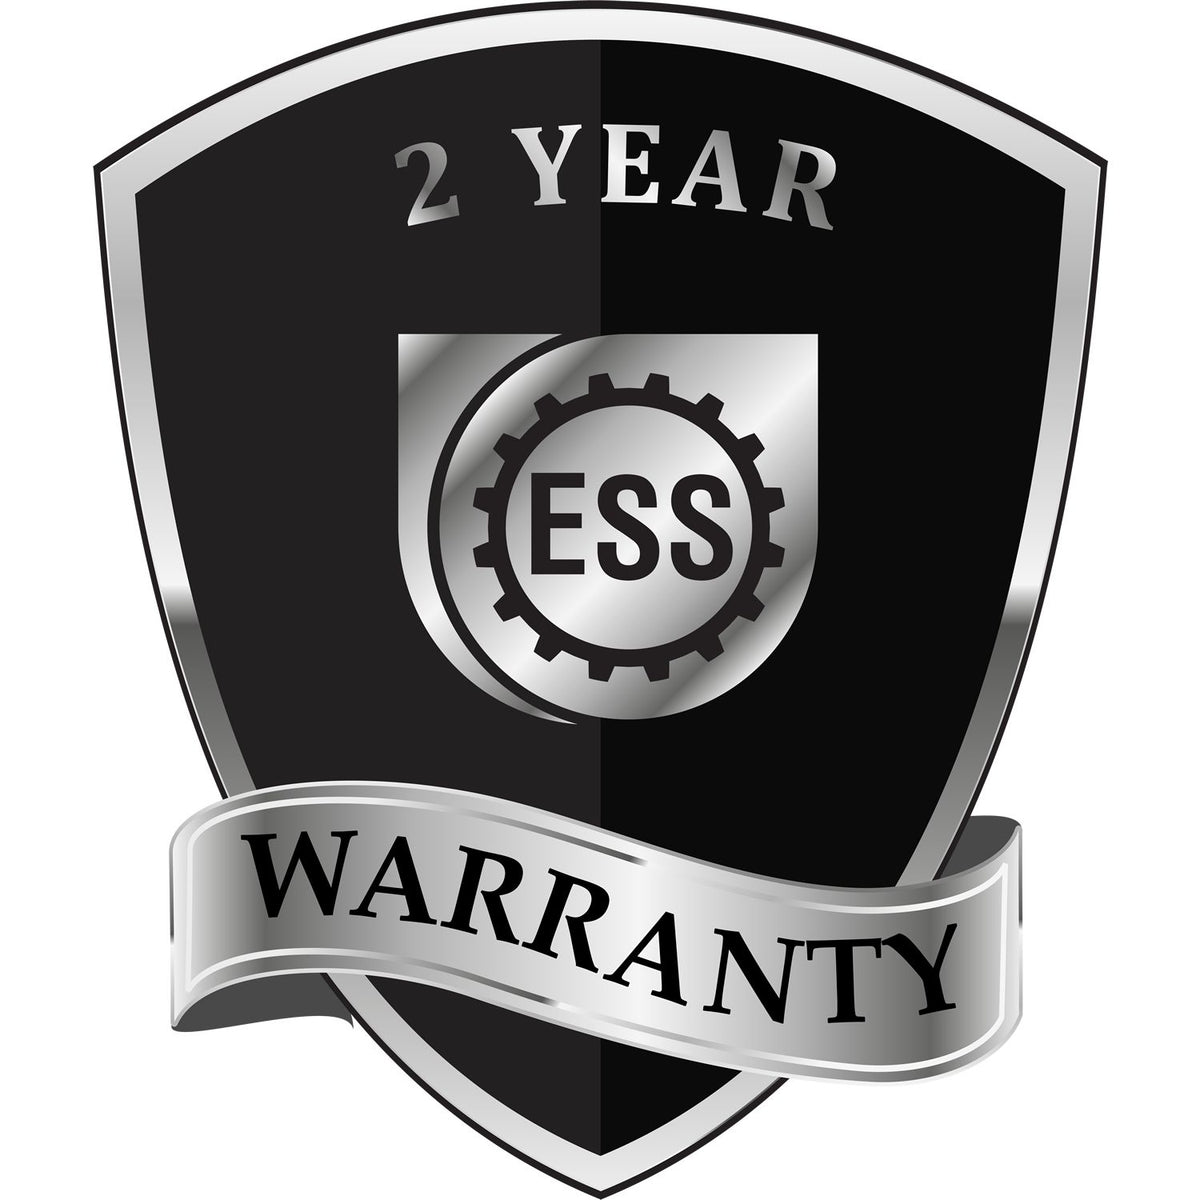 A black and silver badge or emblem showing warranty information for the Hybrid Tennessee Geologist Seal